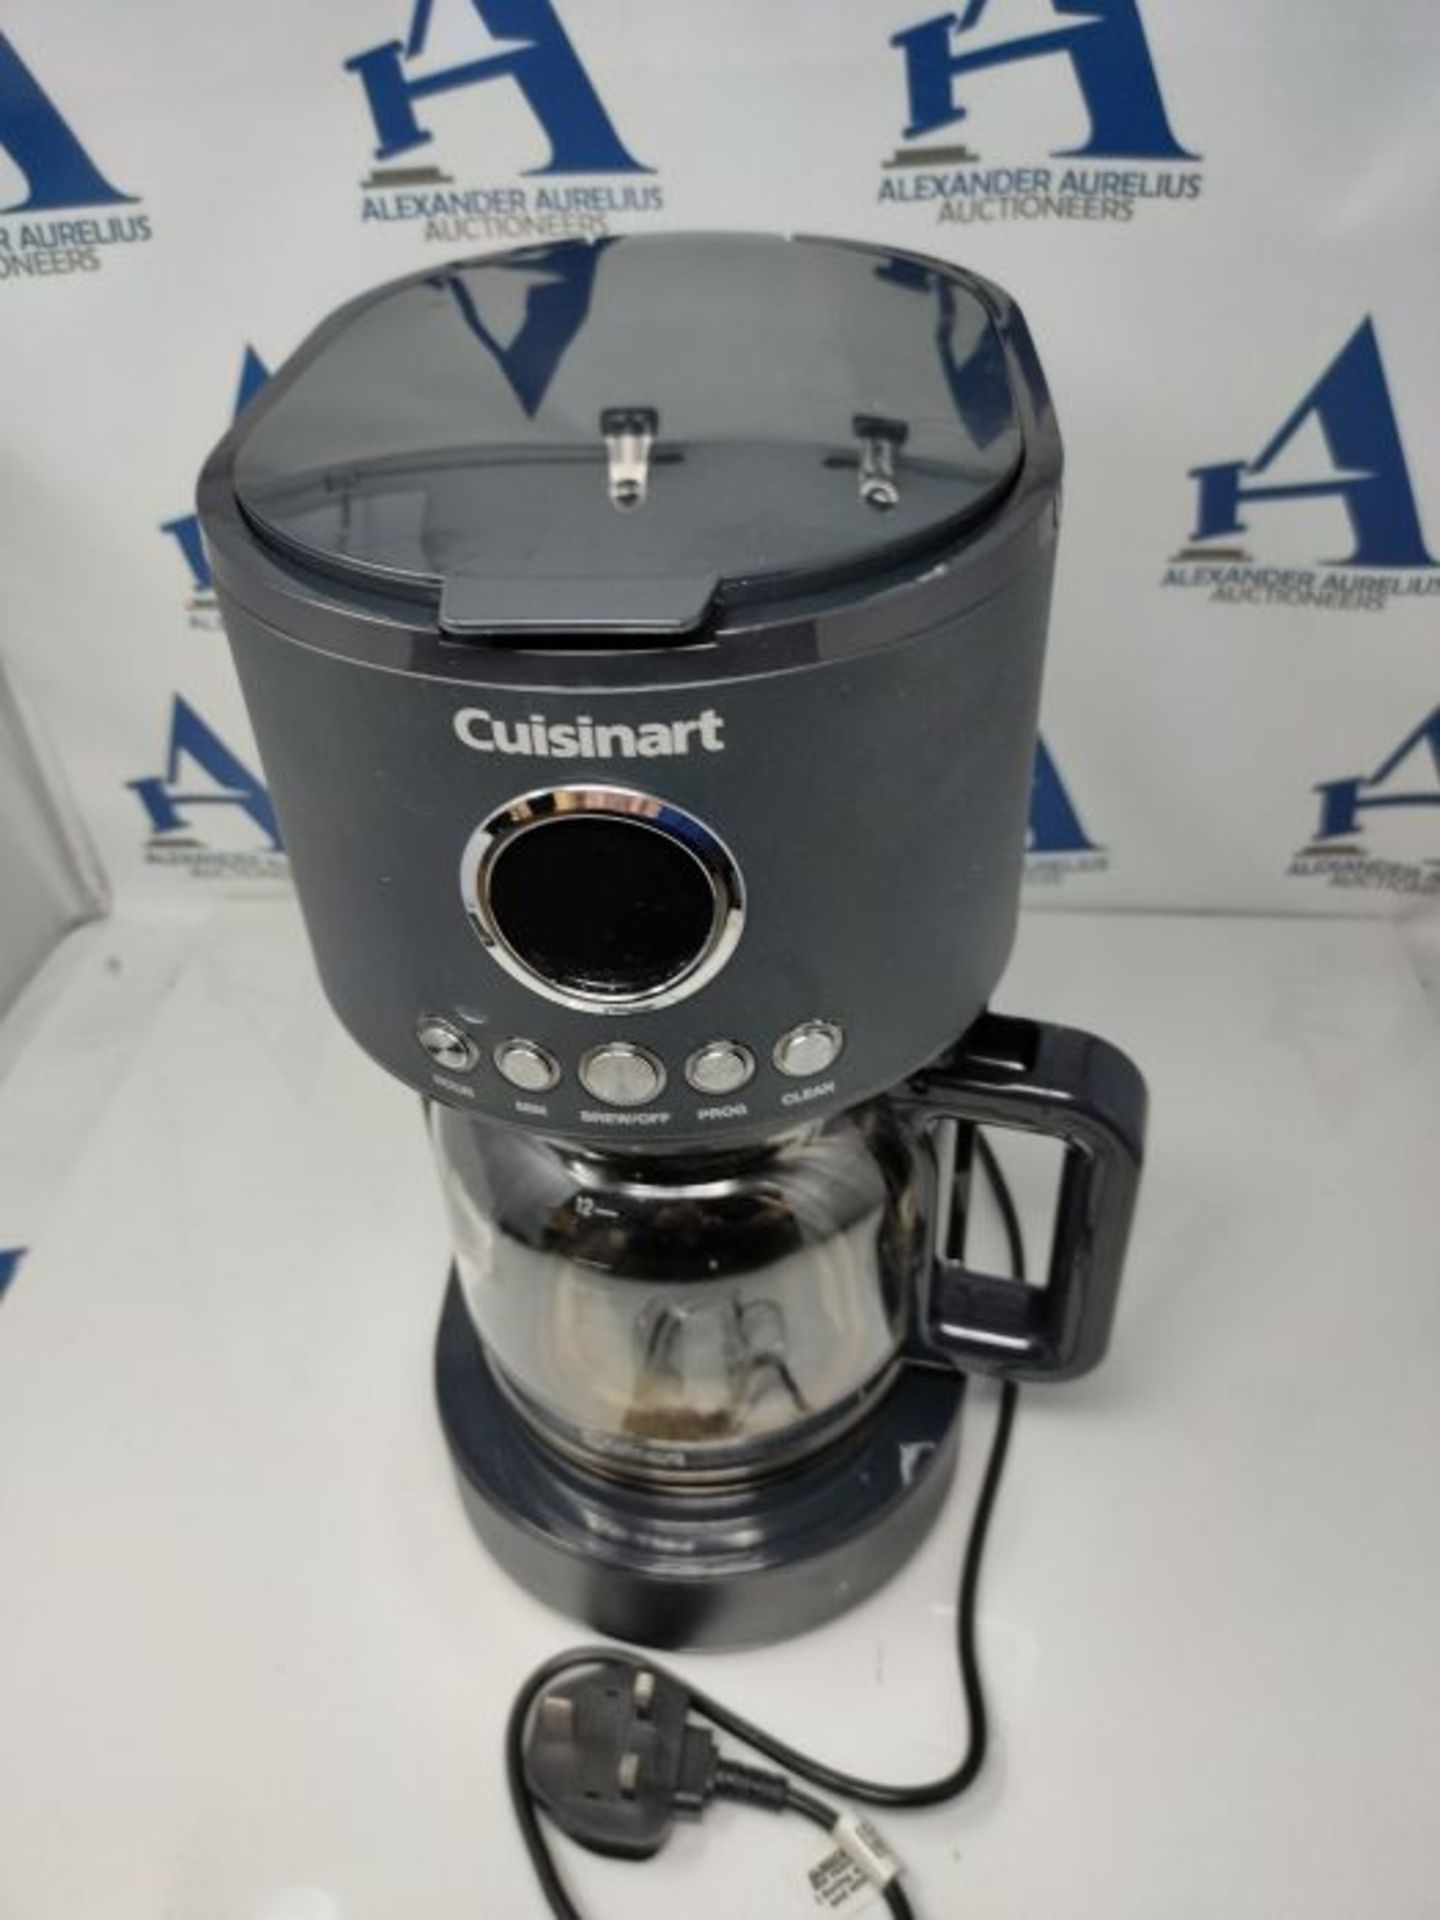 RRP £78.00 Cuisinart Filter Coffee Machine| Instant Coffee | 2L Capacity | Slate Grey | DCC780U - Image 2 of 3